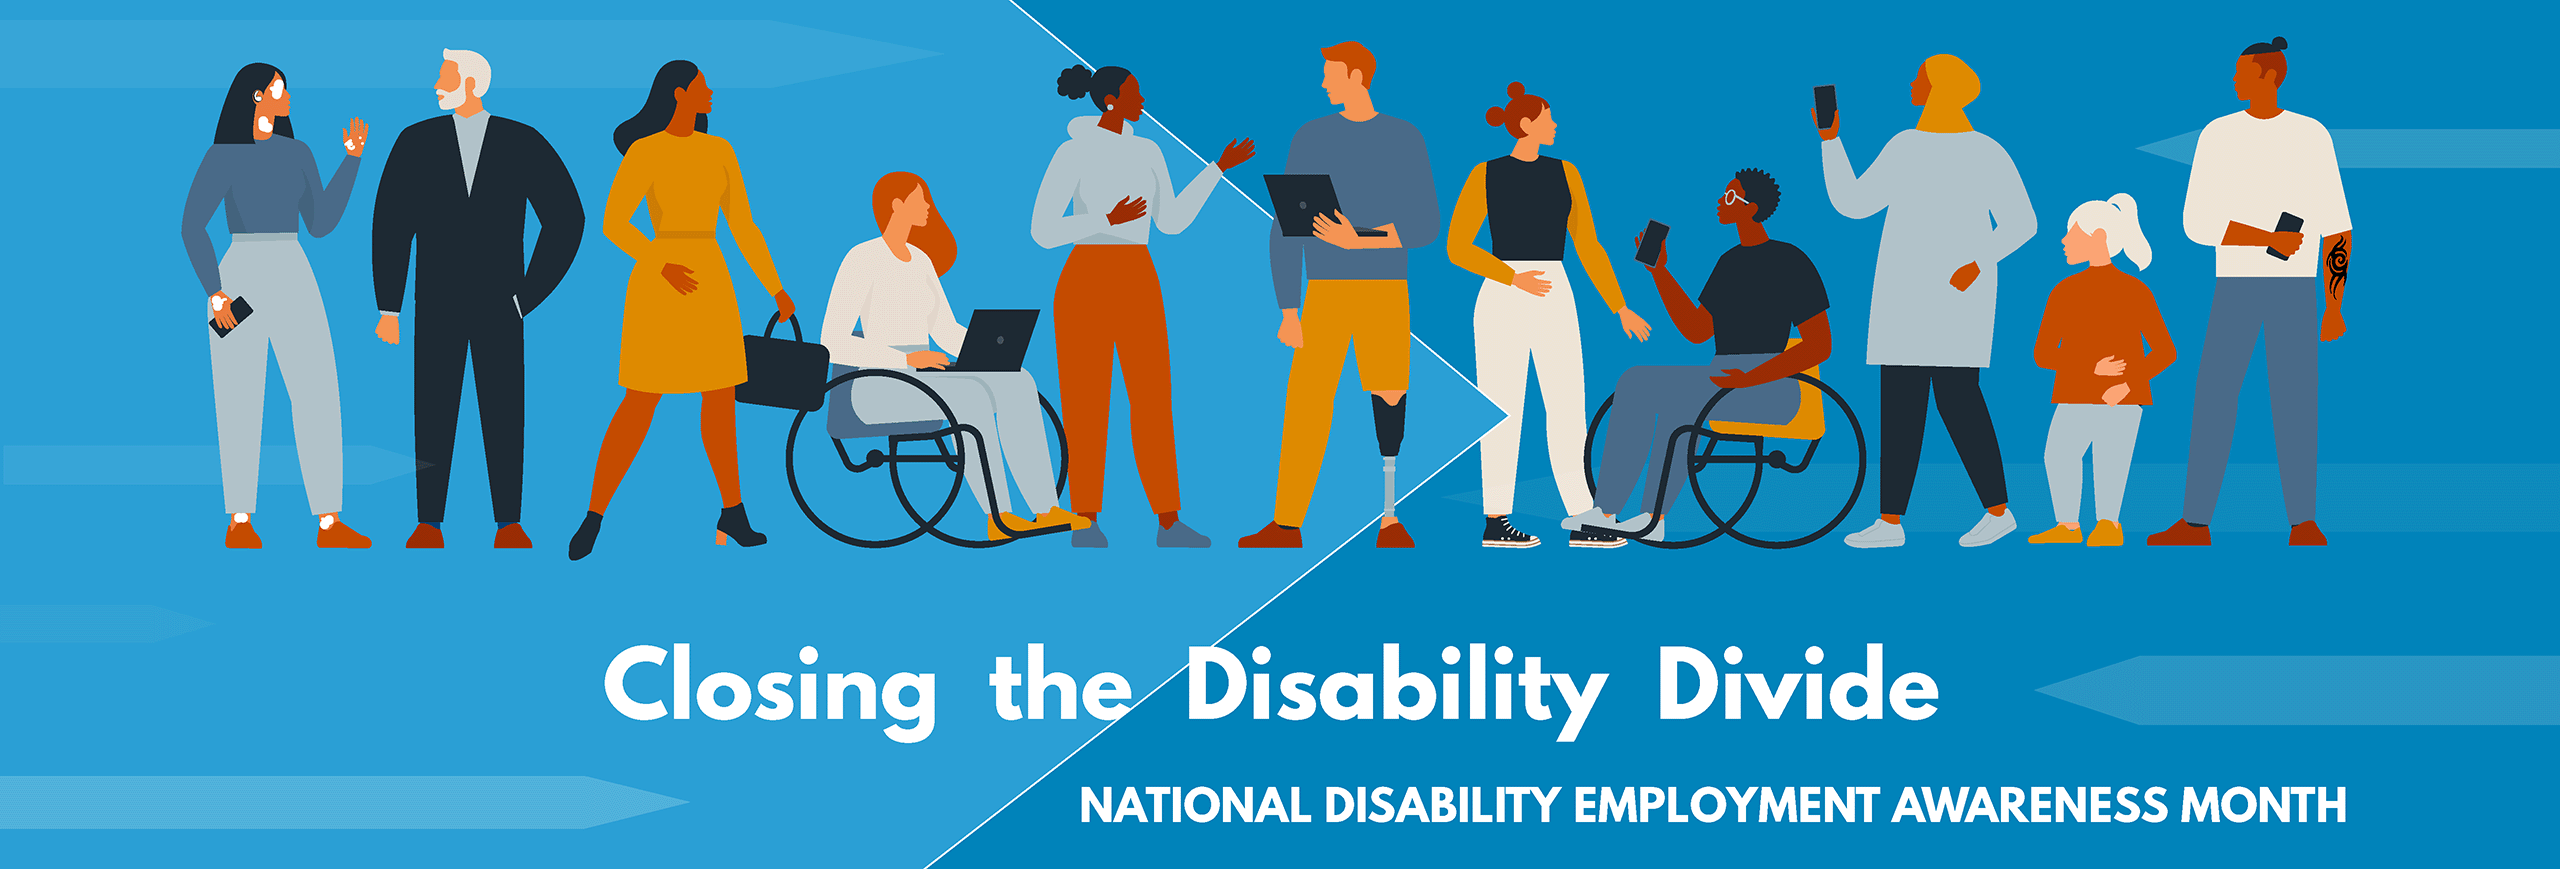 National Disability Employment Awareness Month - Closing the Disability Divide